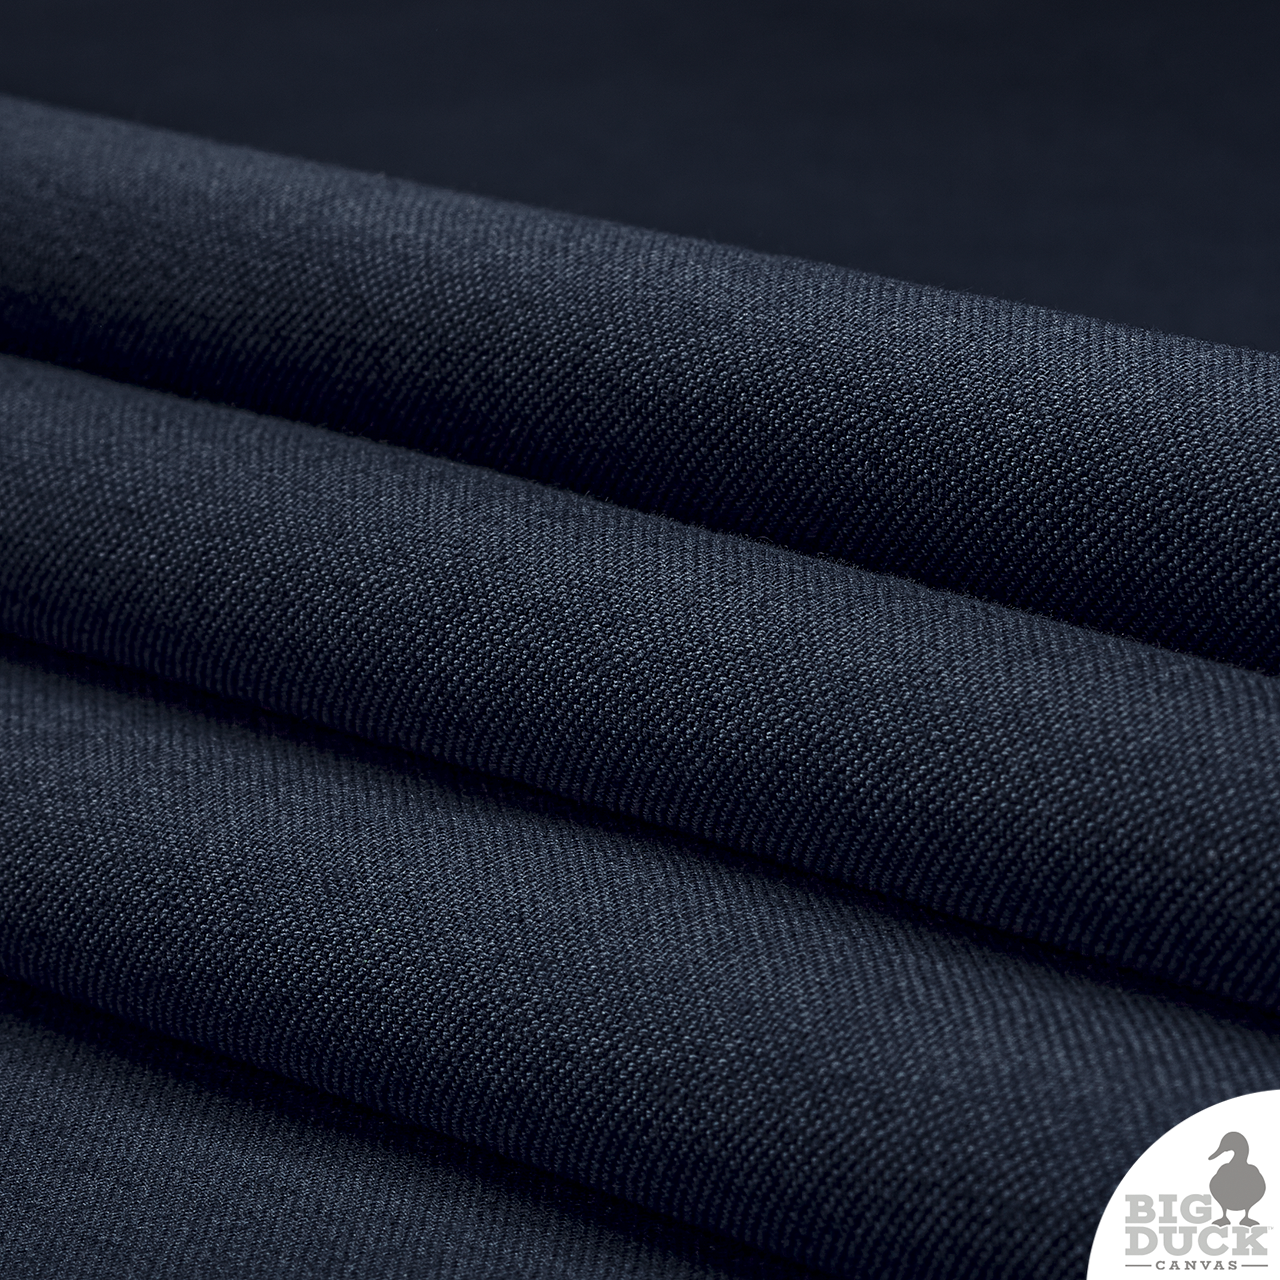 Cotton Canvas Fabric in Navy Blue